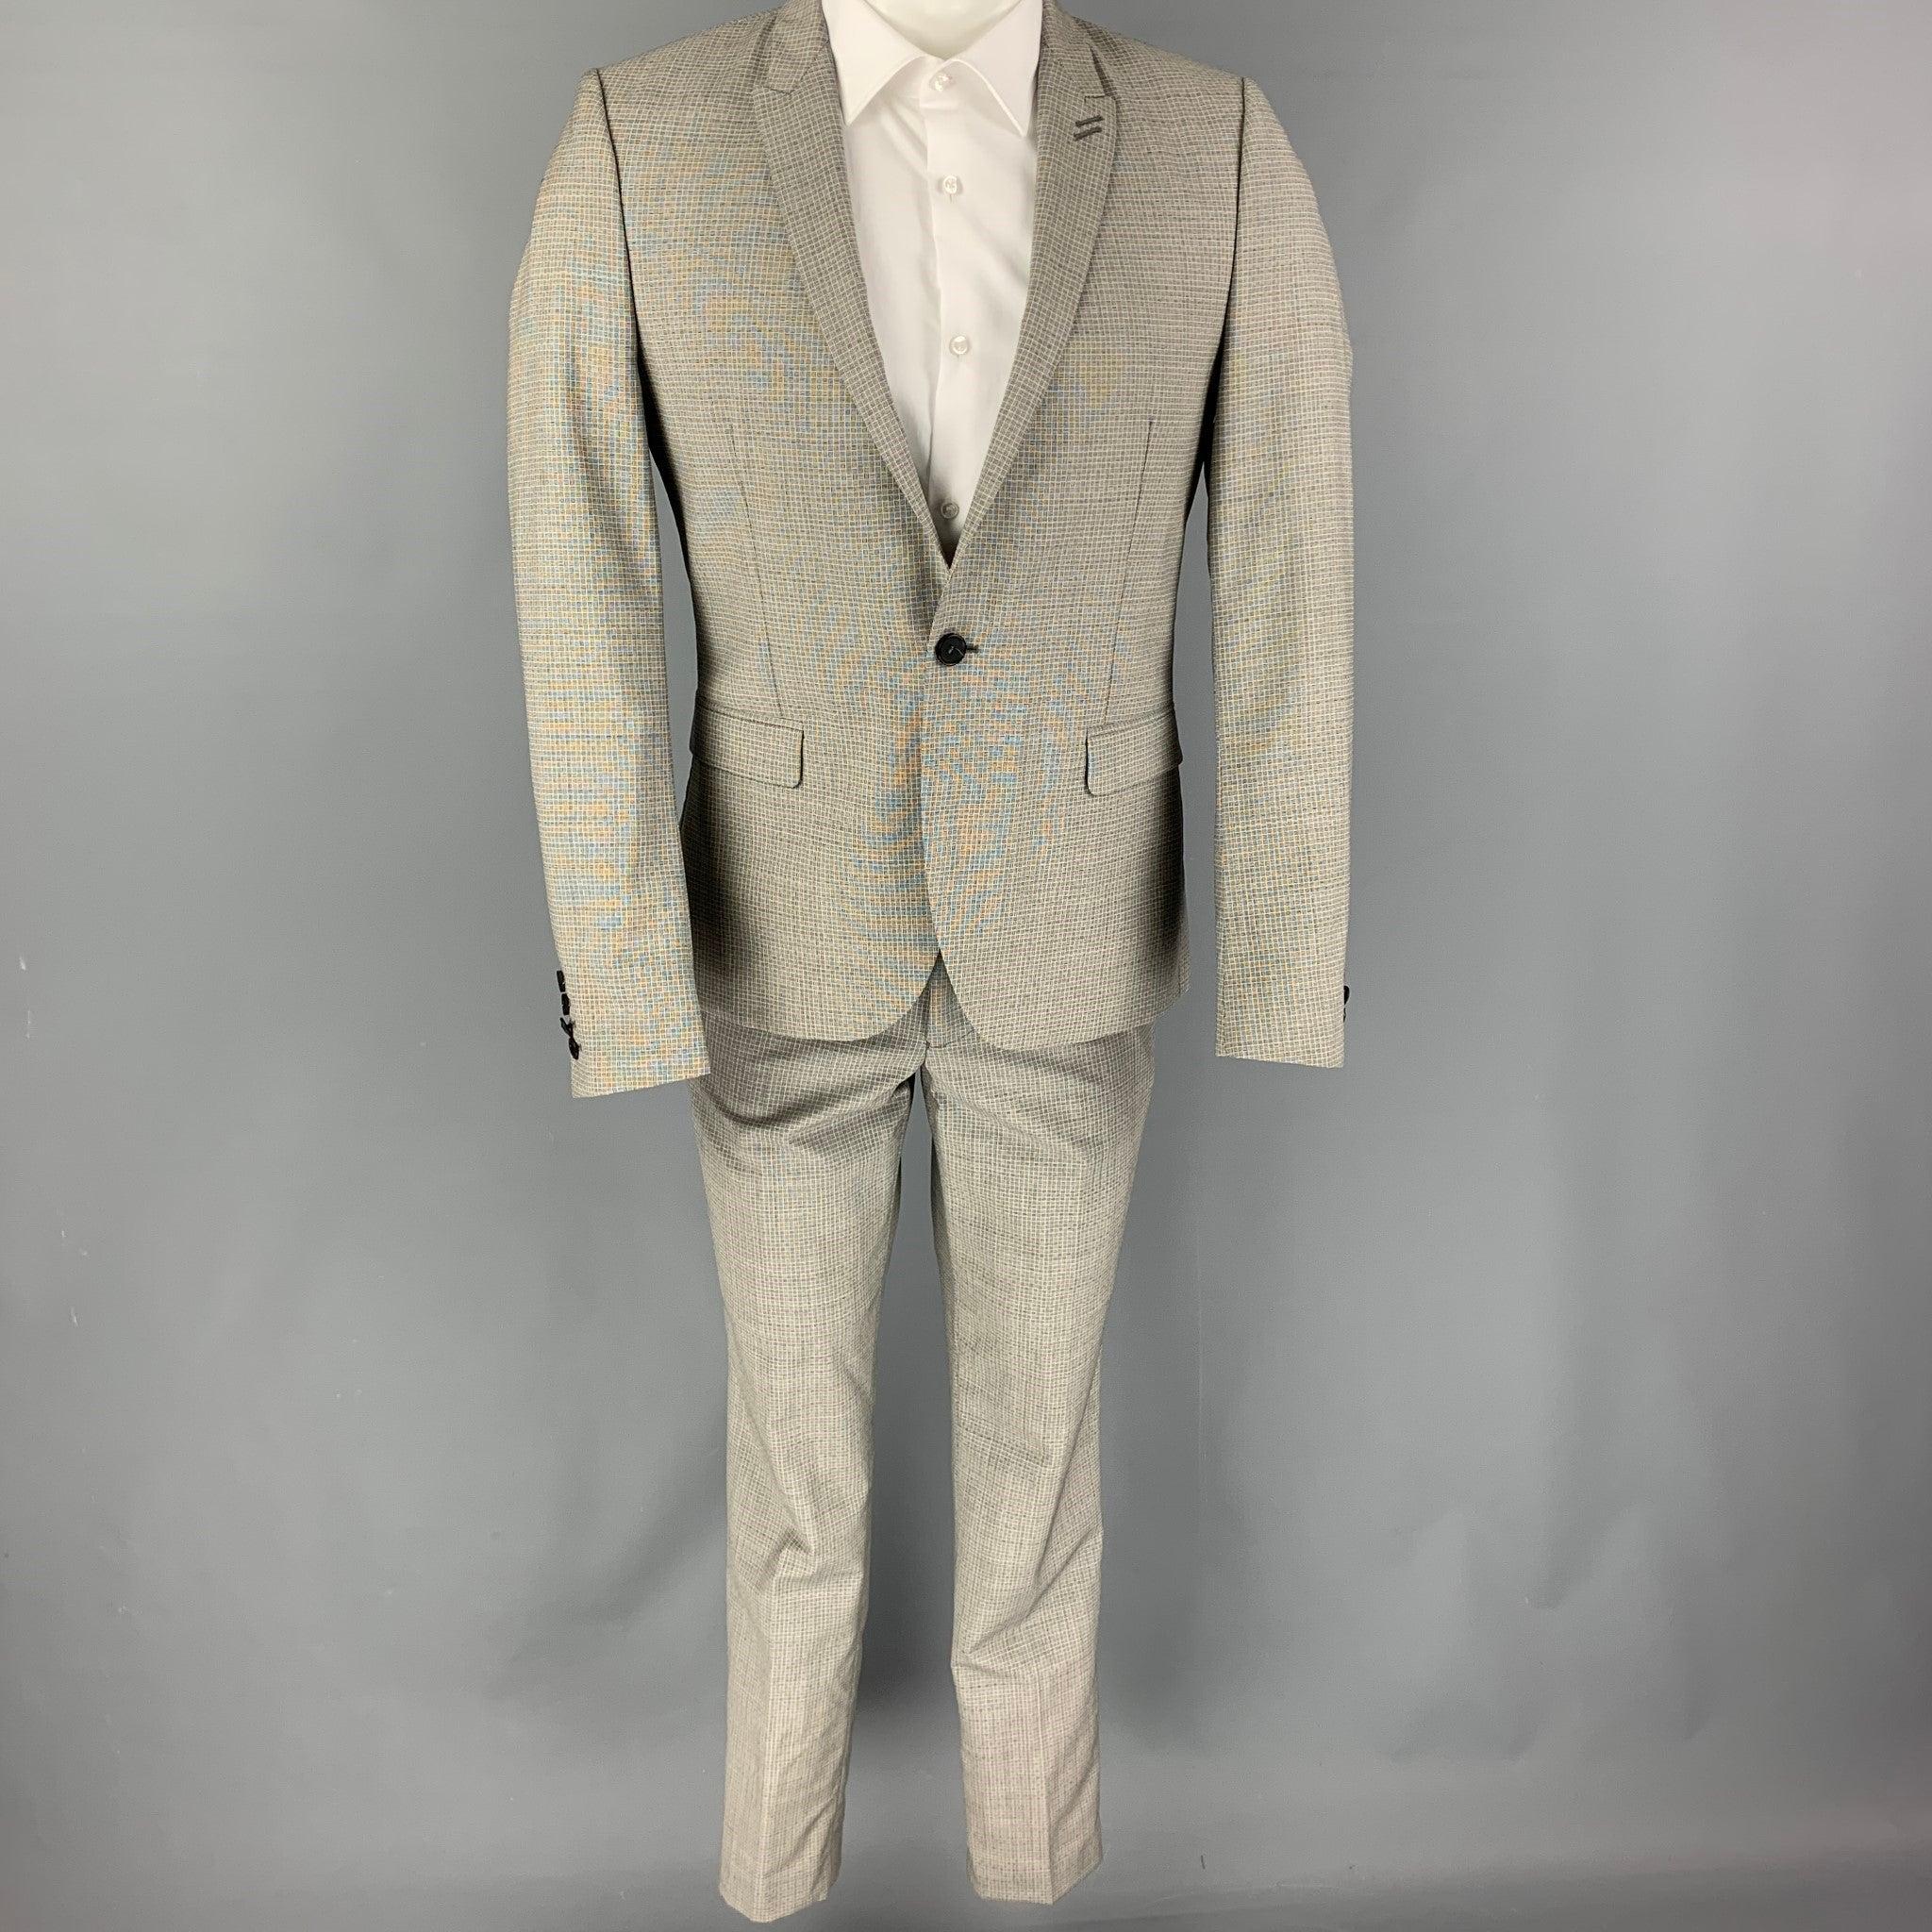 THE KOOPLES
suit comes in a grey & black wool / mohair with a full liner and includes a single breasted, single button sport coat with a peak lapel and matching flat front trousers. Good Pre-Owned Condition.
Light discoloration & wear throughout.